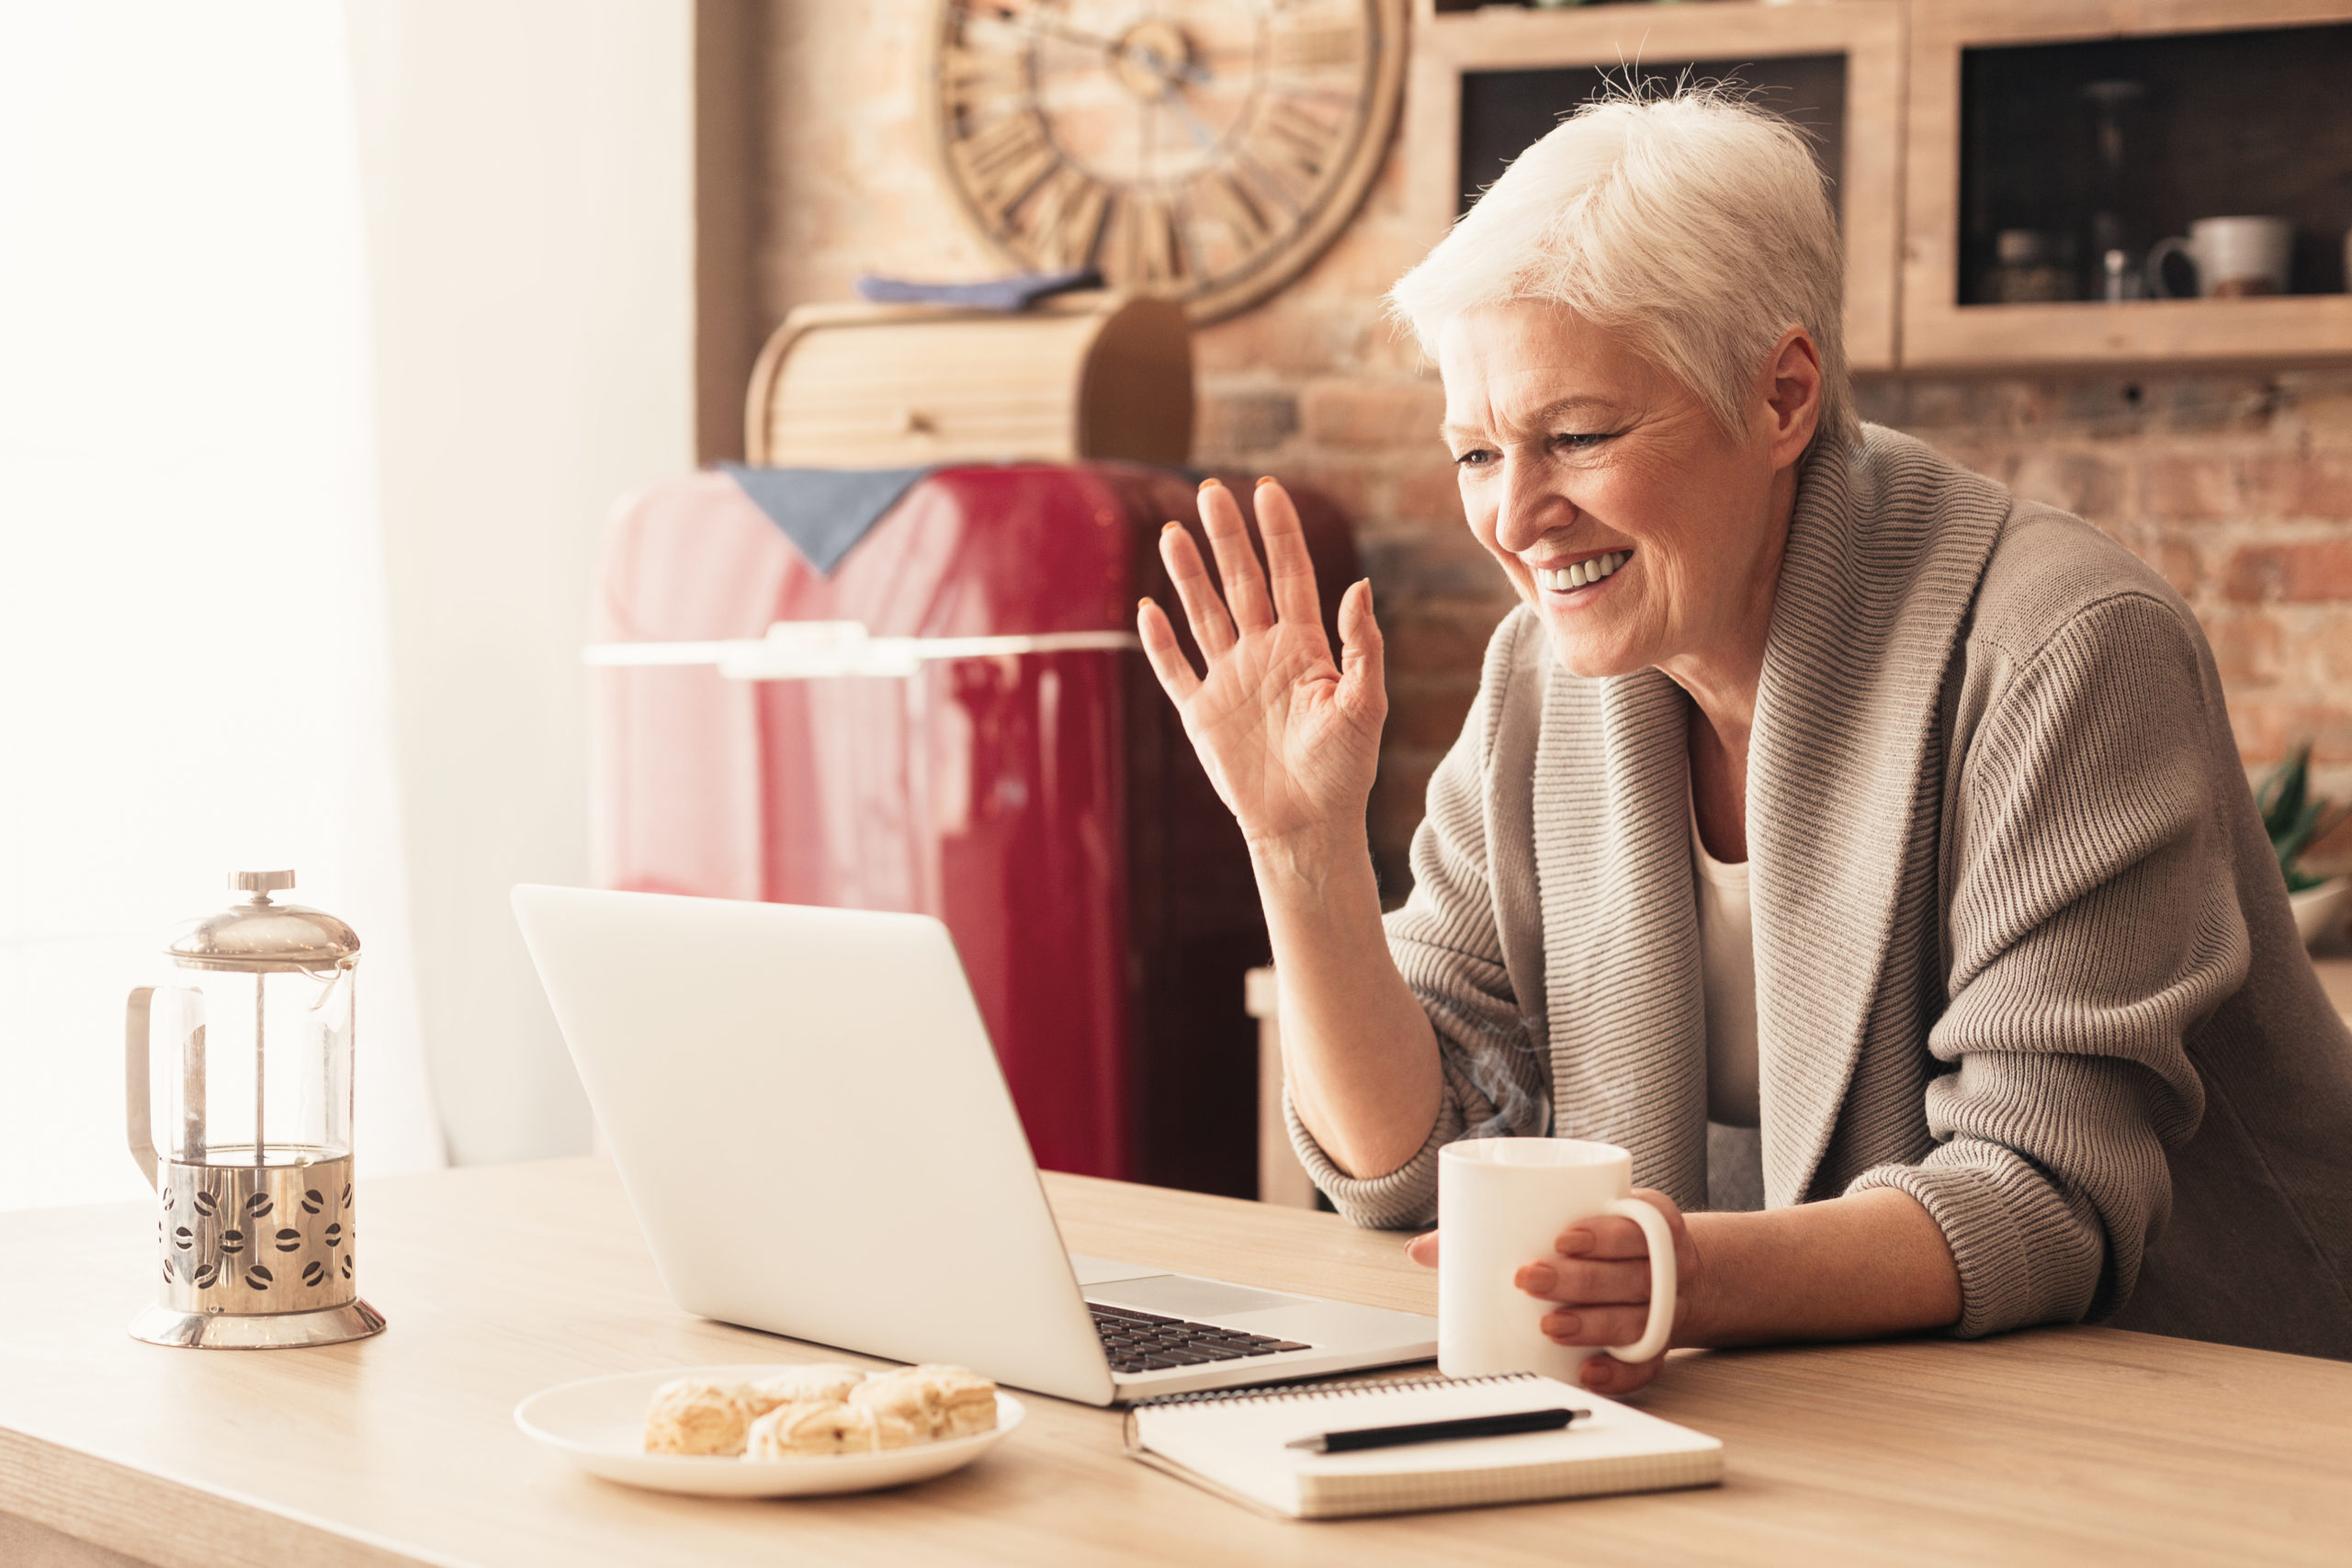 4 Tips to Simplify Video Calls for Seniors